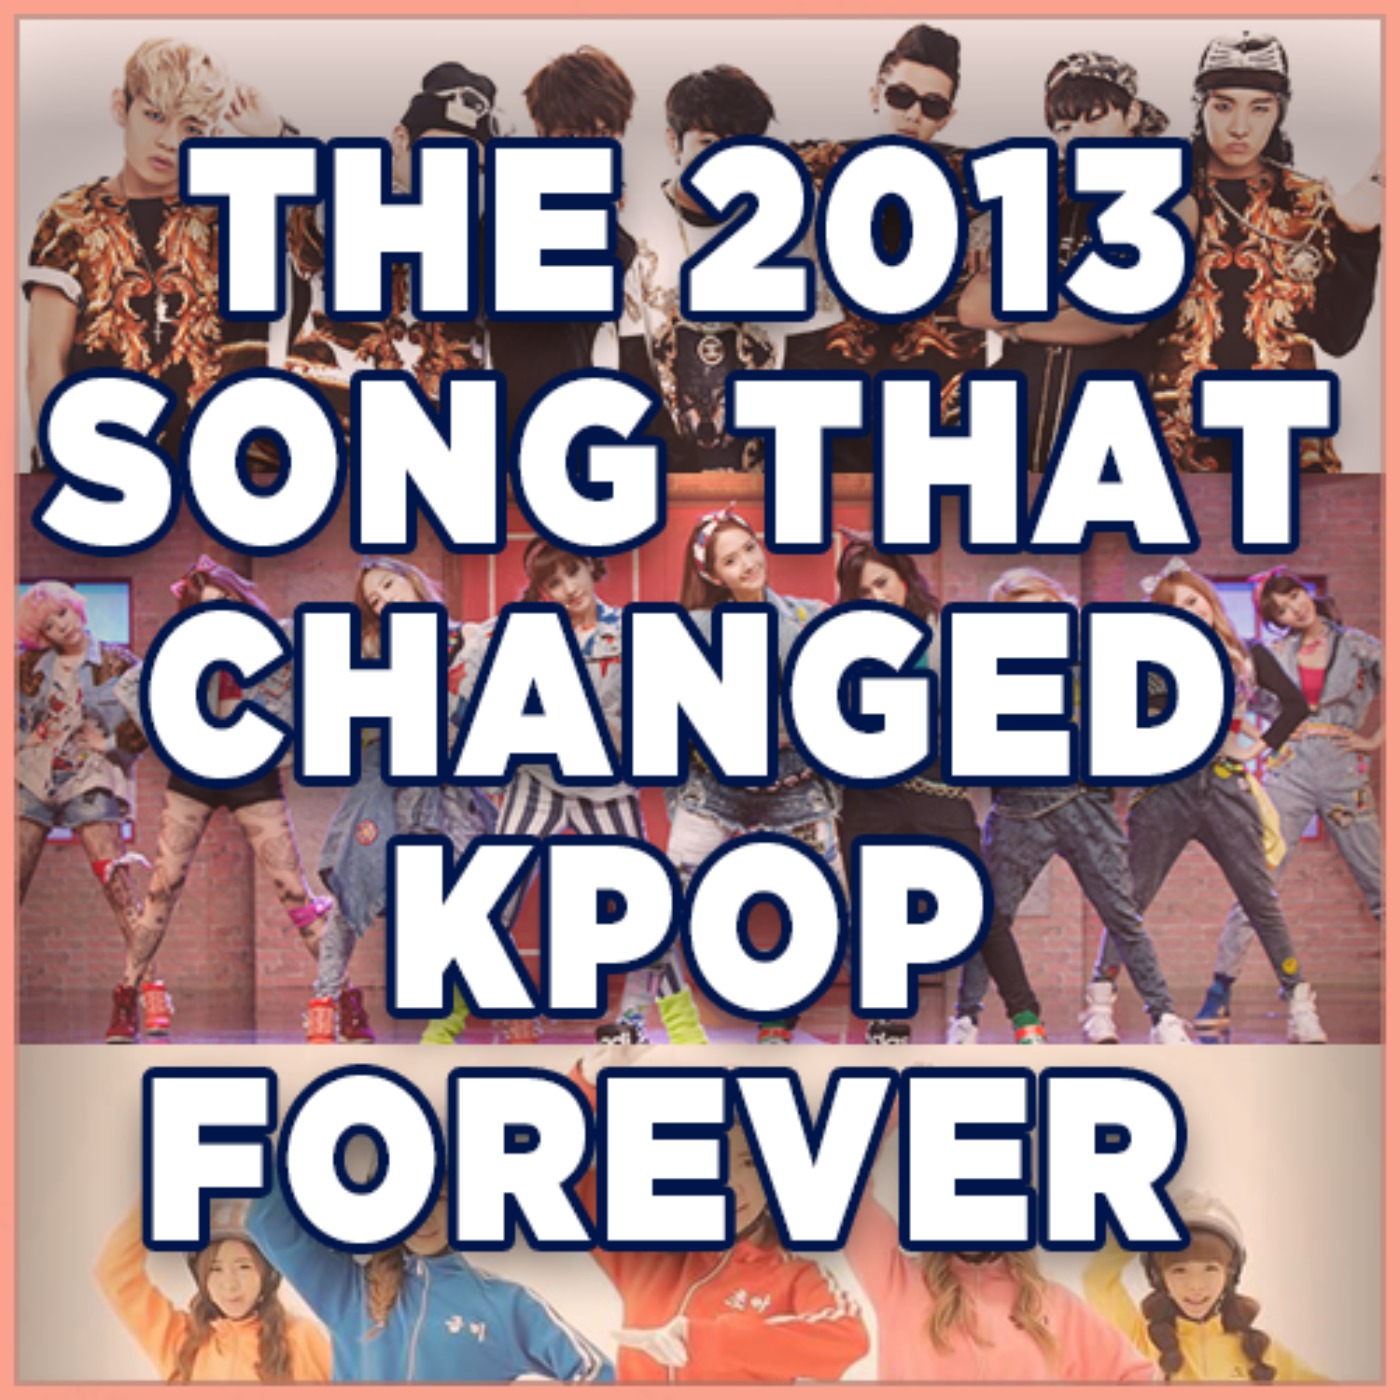 The Most Memorable K-Pop Song of 2013